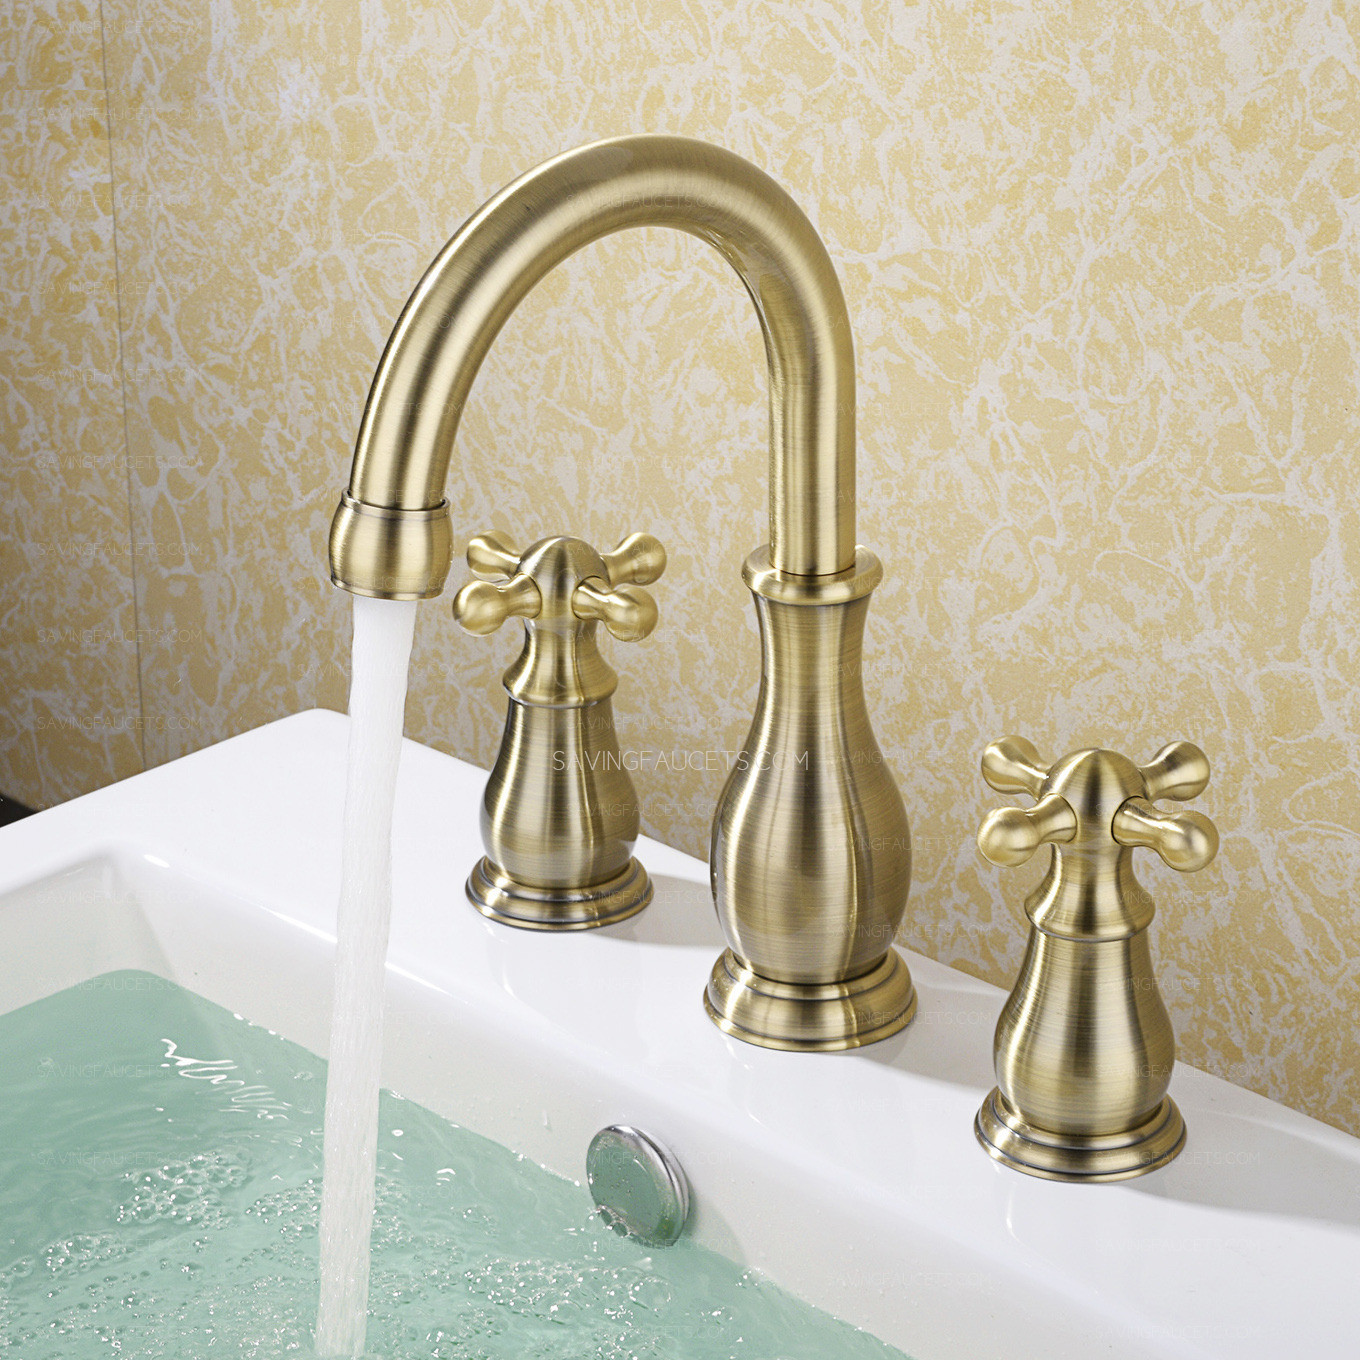 Antique Brass Finish Bathroom Faucets
 Antique Brass Finish Widespread Installation Rotatable